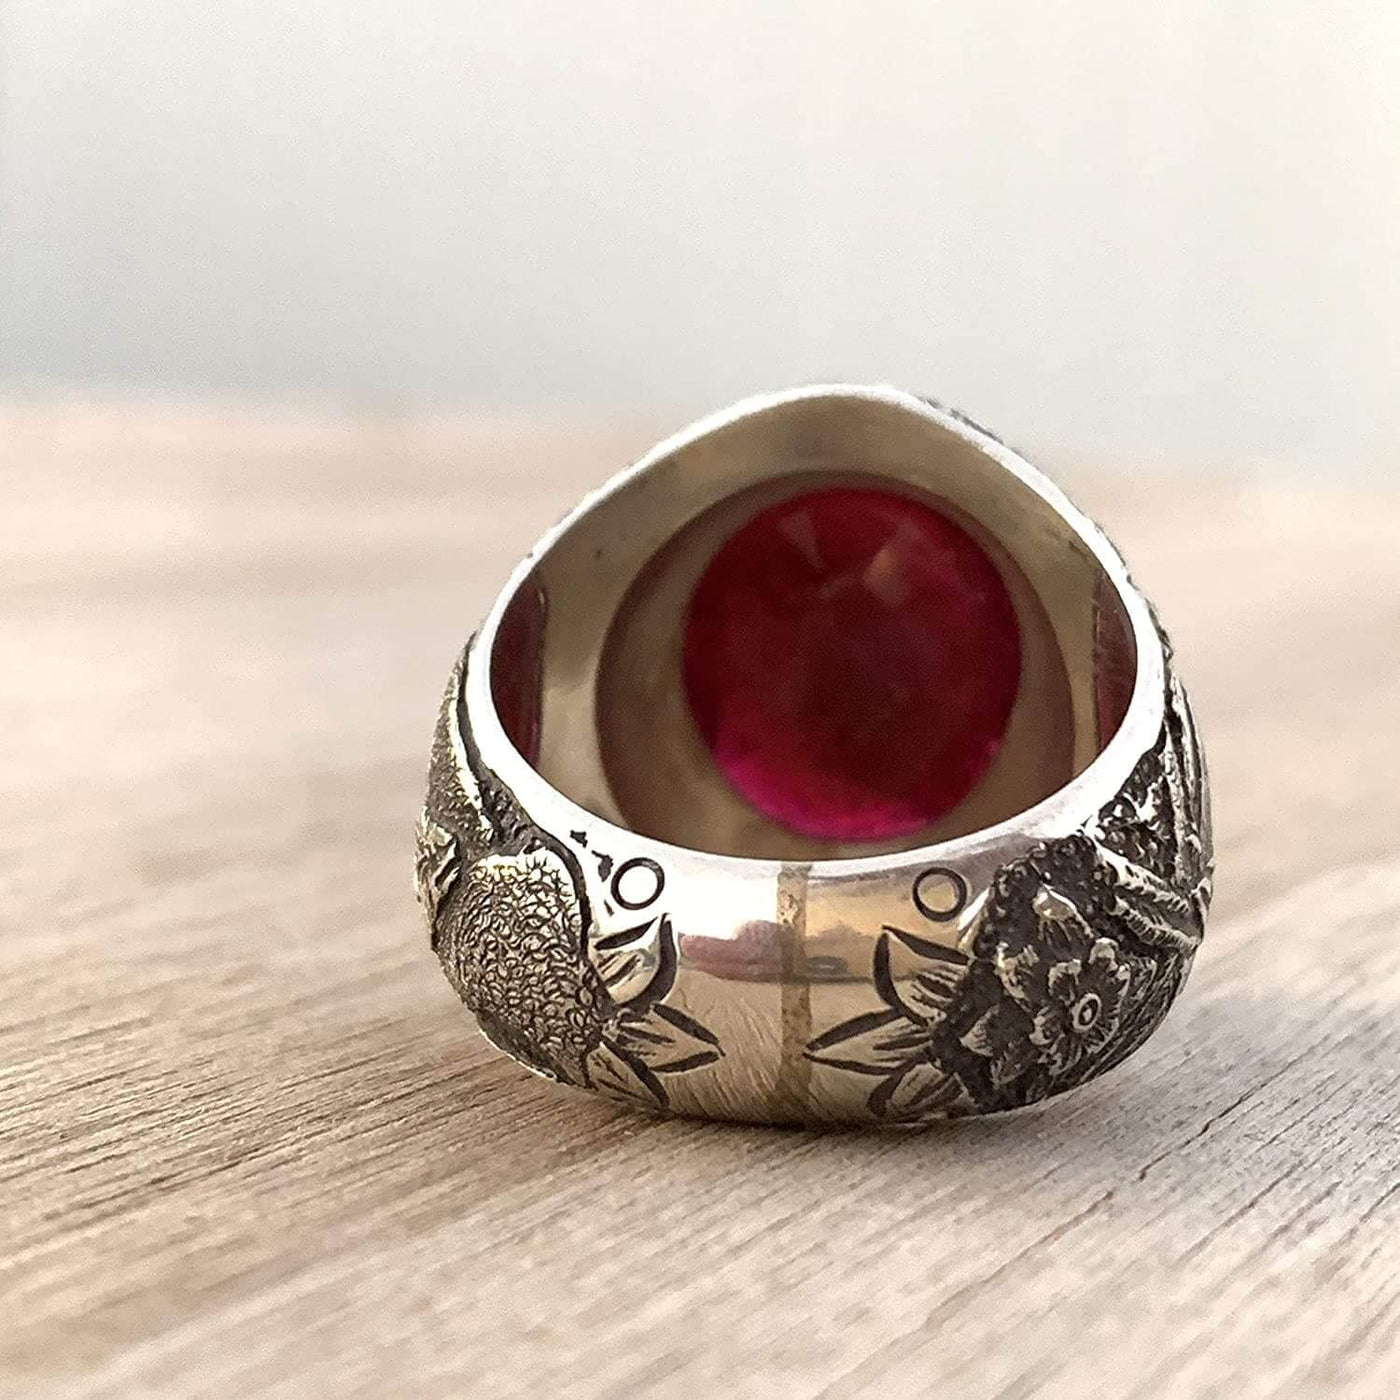 Handmade Ruby Rings | AlAliGems | Ruby Vintage Ring Red Real Ruby Stone | Hand Crafted Size 11 - Al Ali Gems